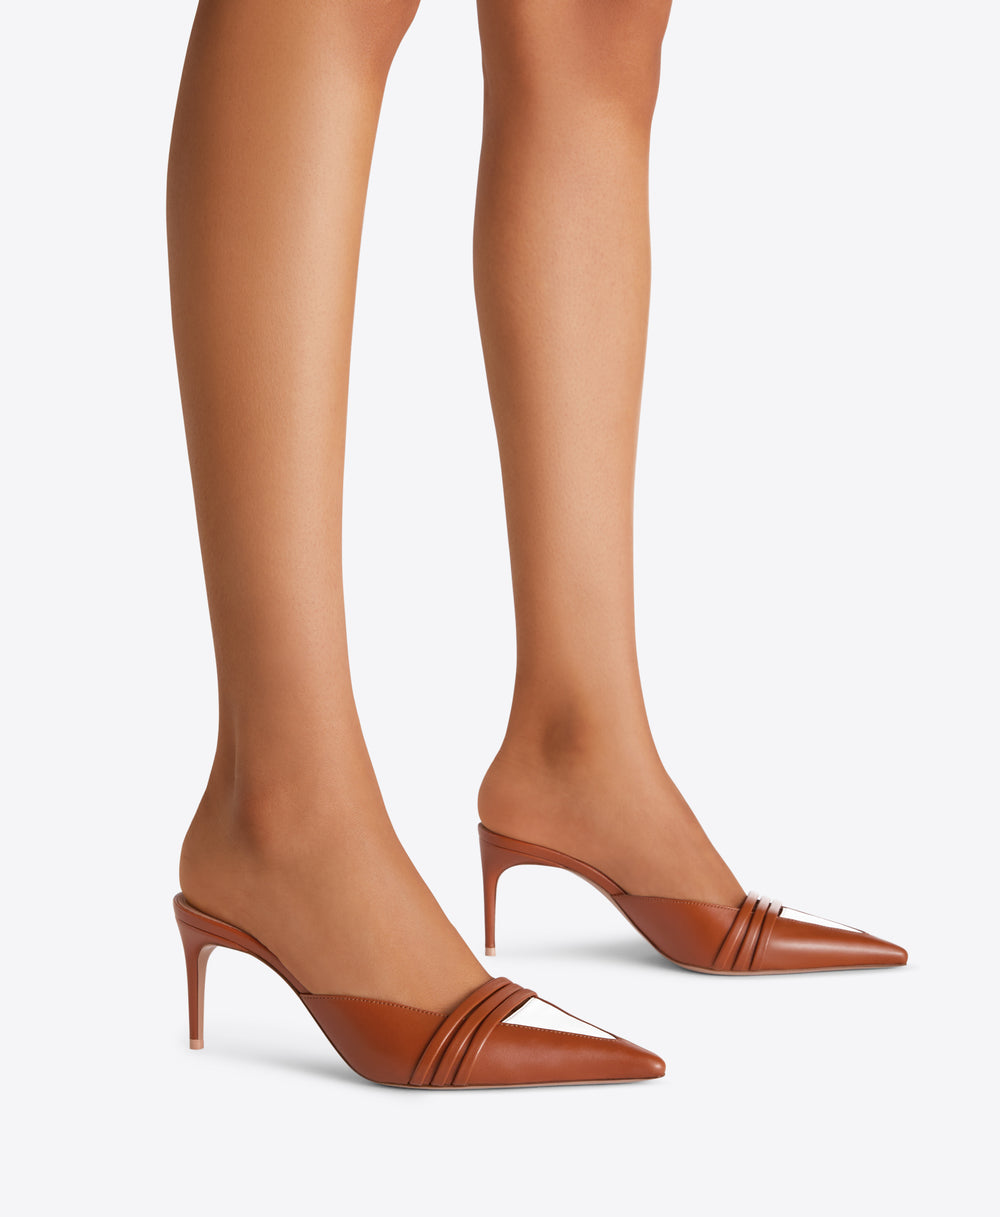 Taron 70 Tan Leather Mules with White Accent Malone Souliers